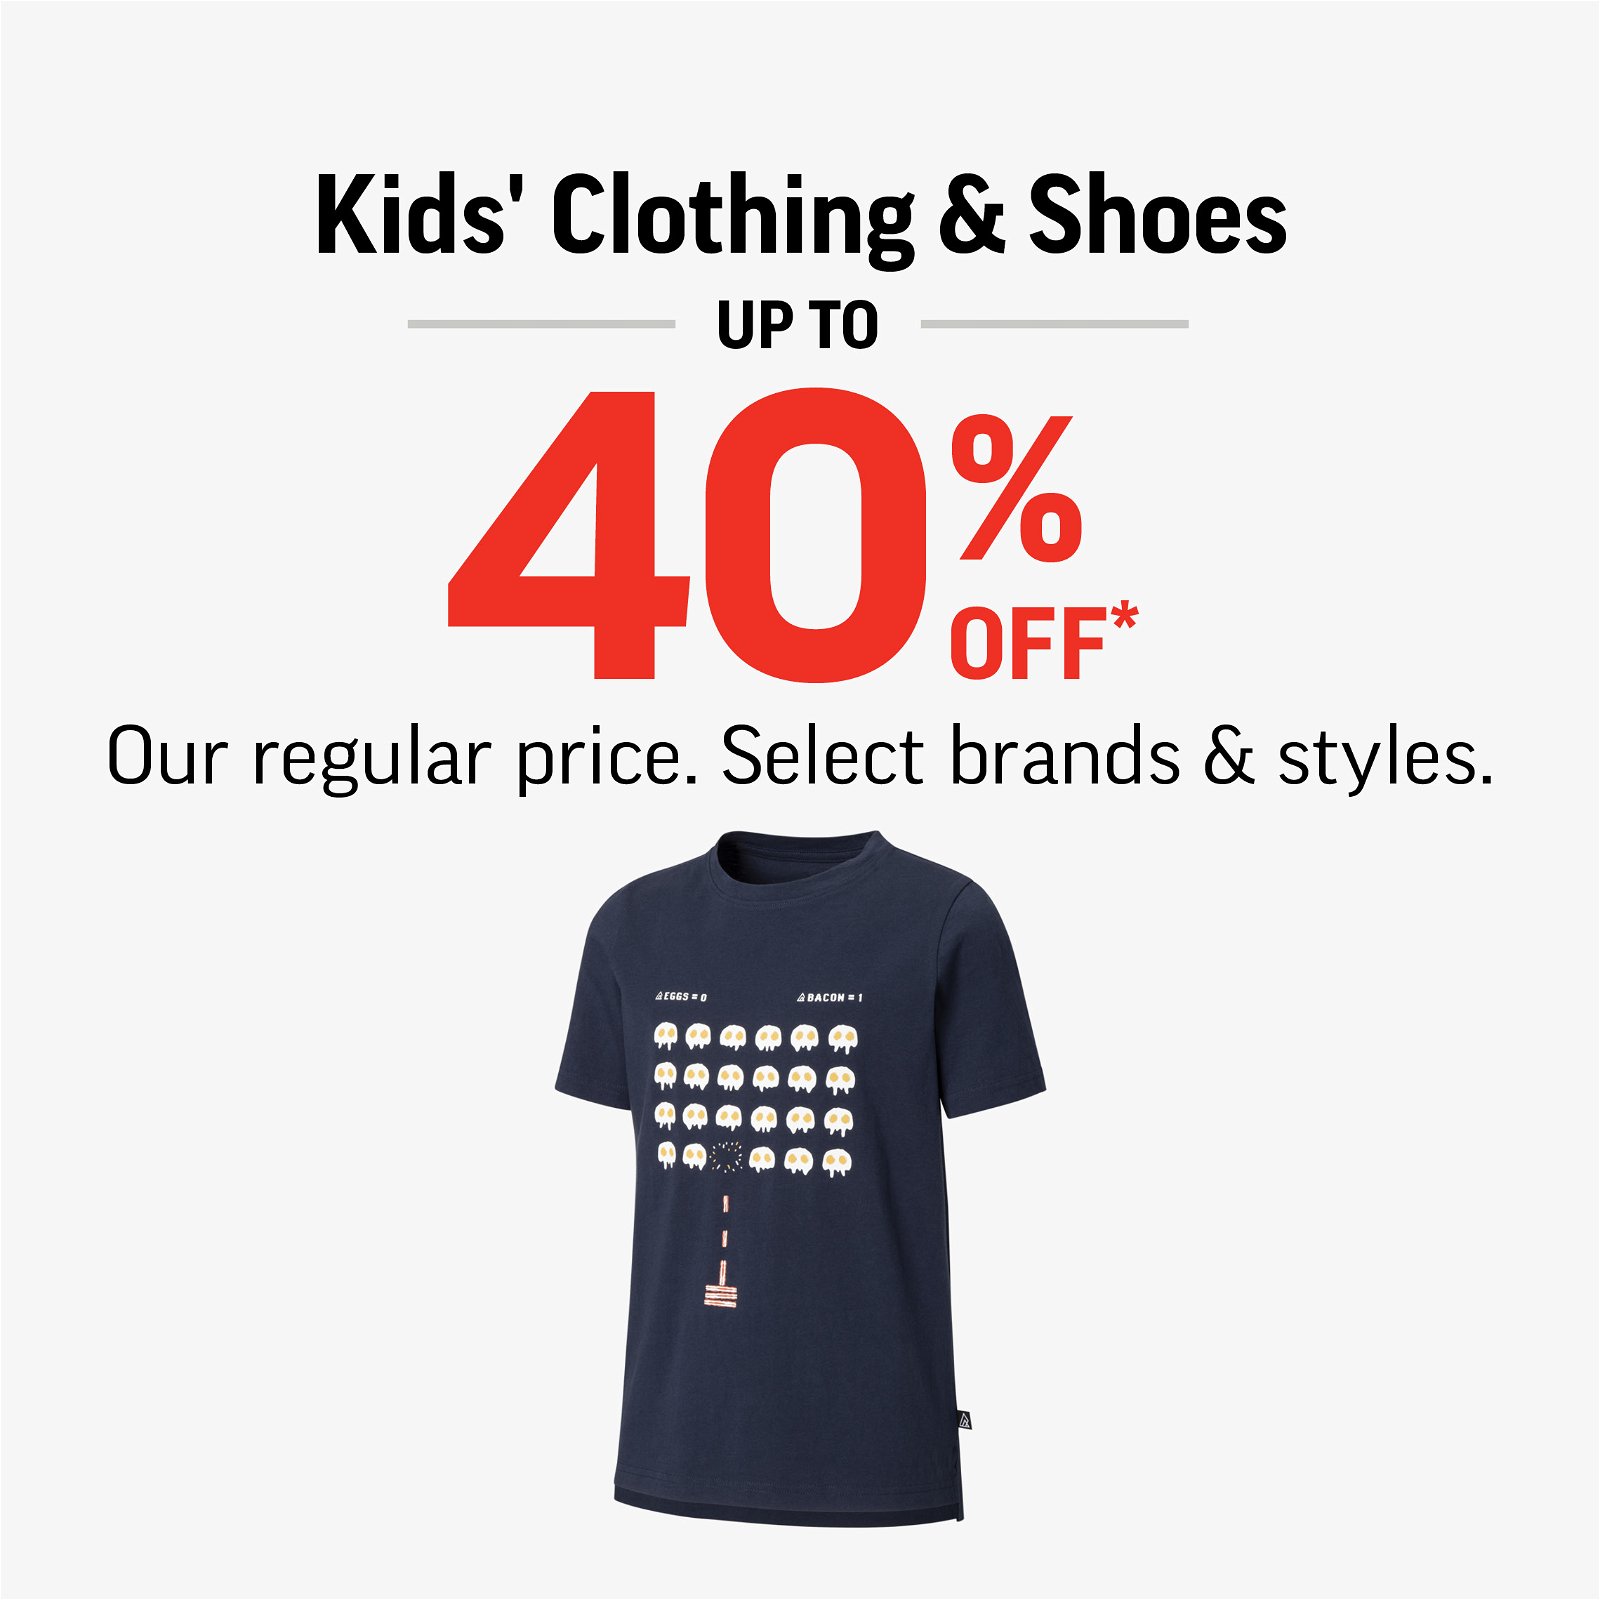 KIDS' CLOTHING & SHOES UP TO 40% OFF